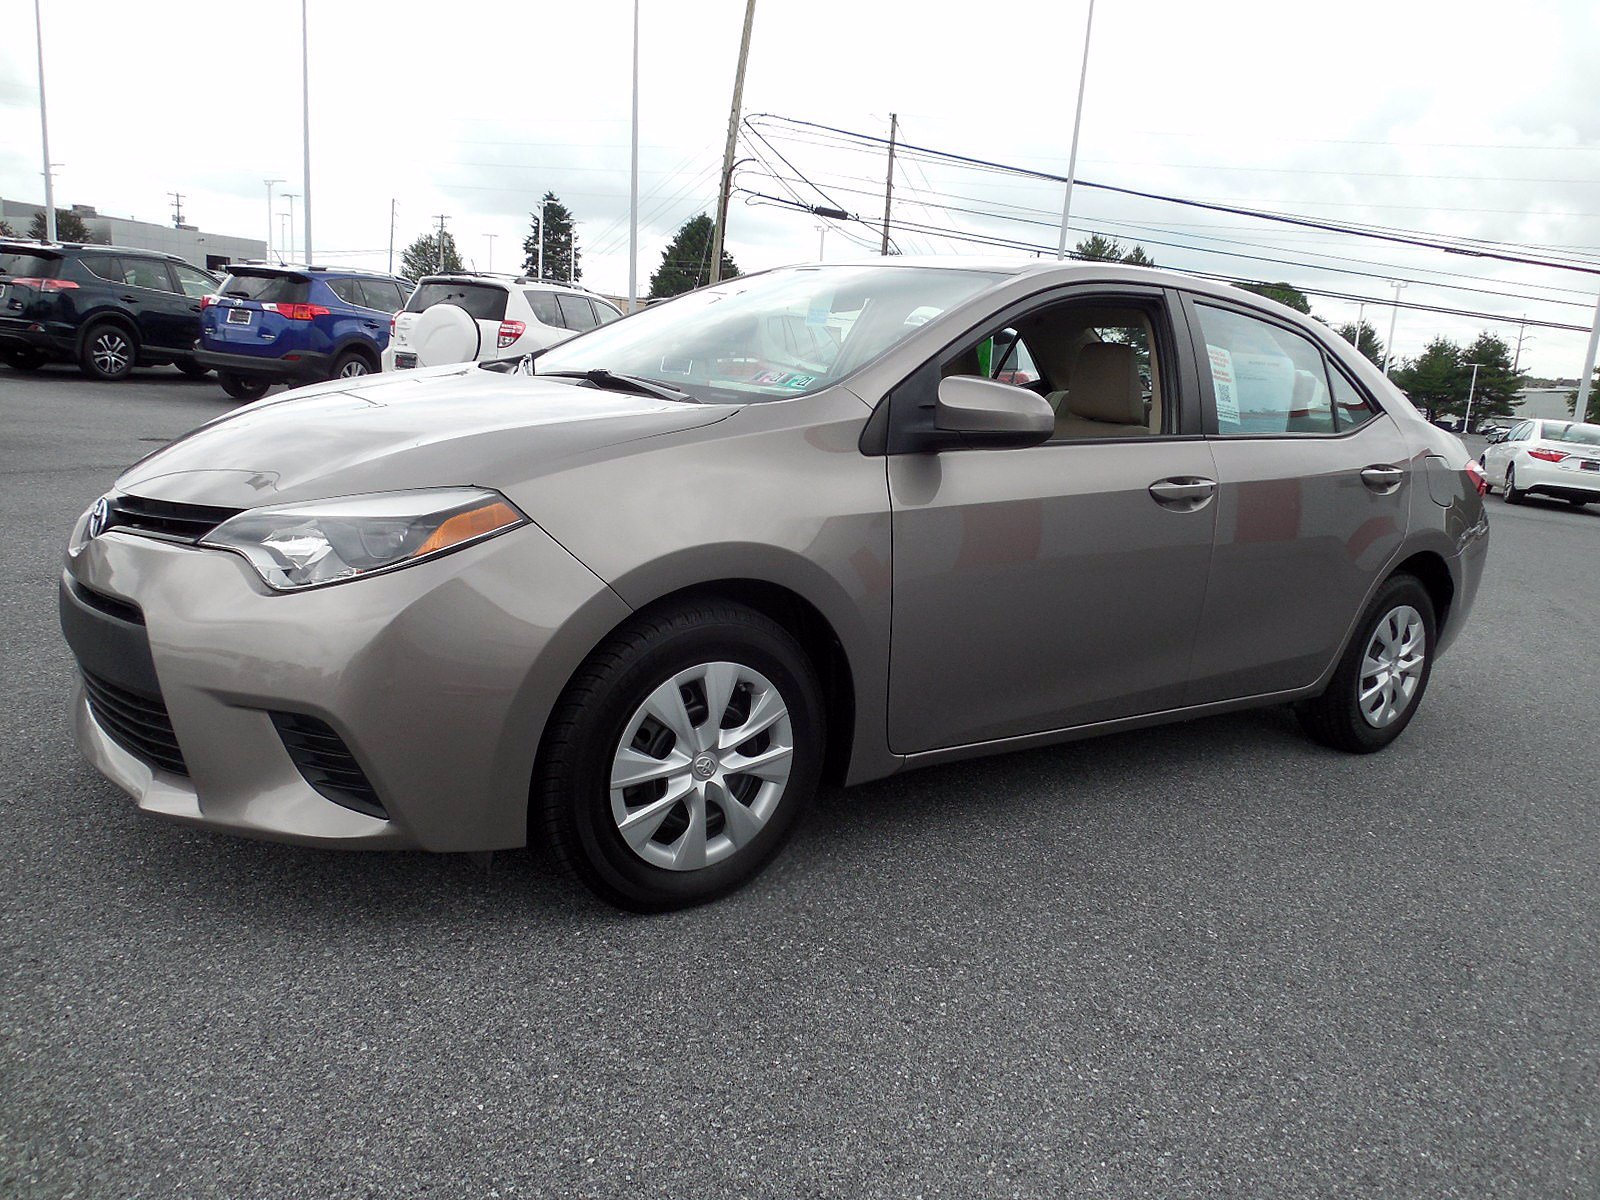 Certified Pre-Owned 2014 Toyota Corolla LE ECO 4dr Car in ...